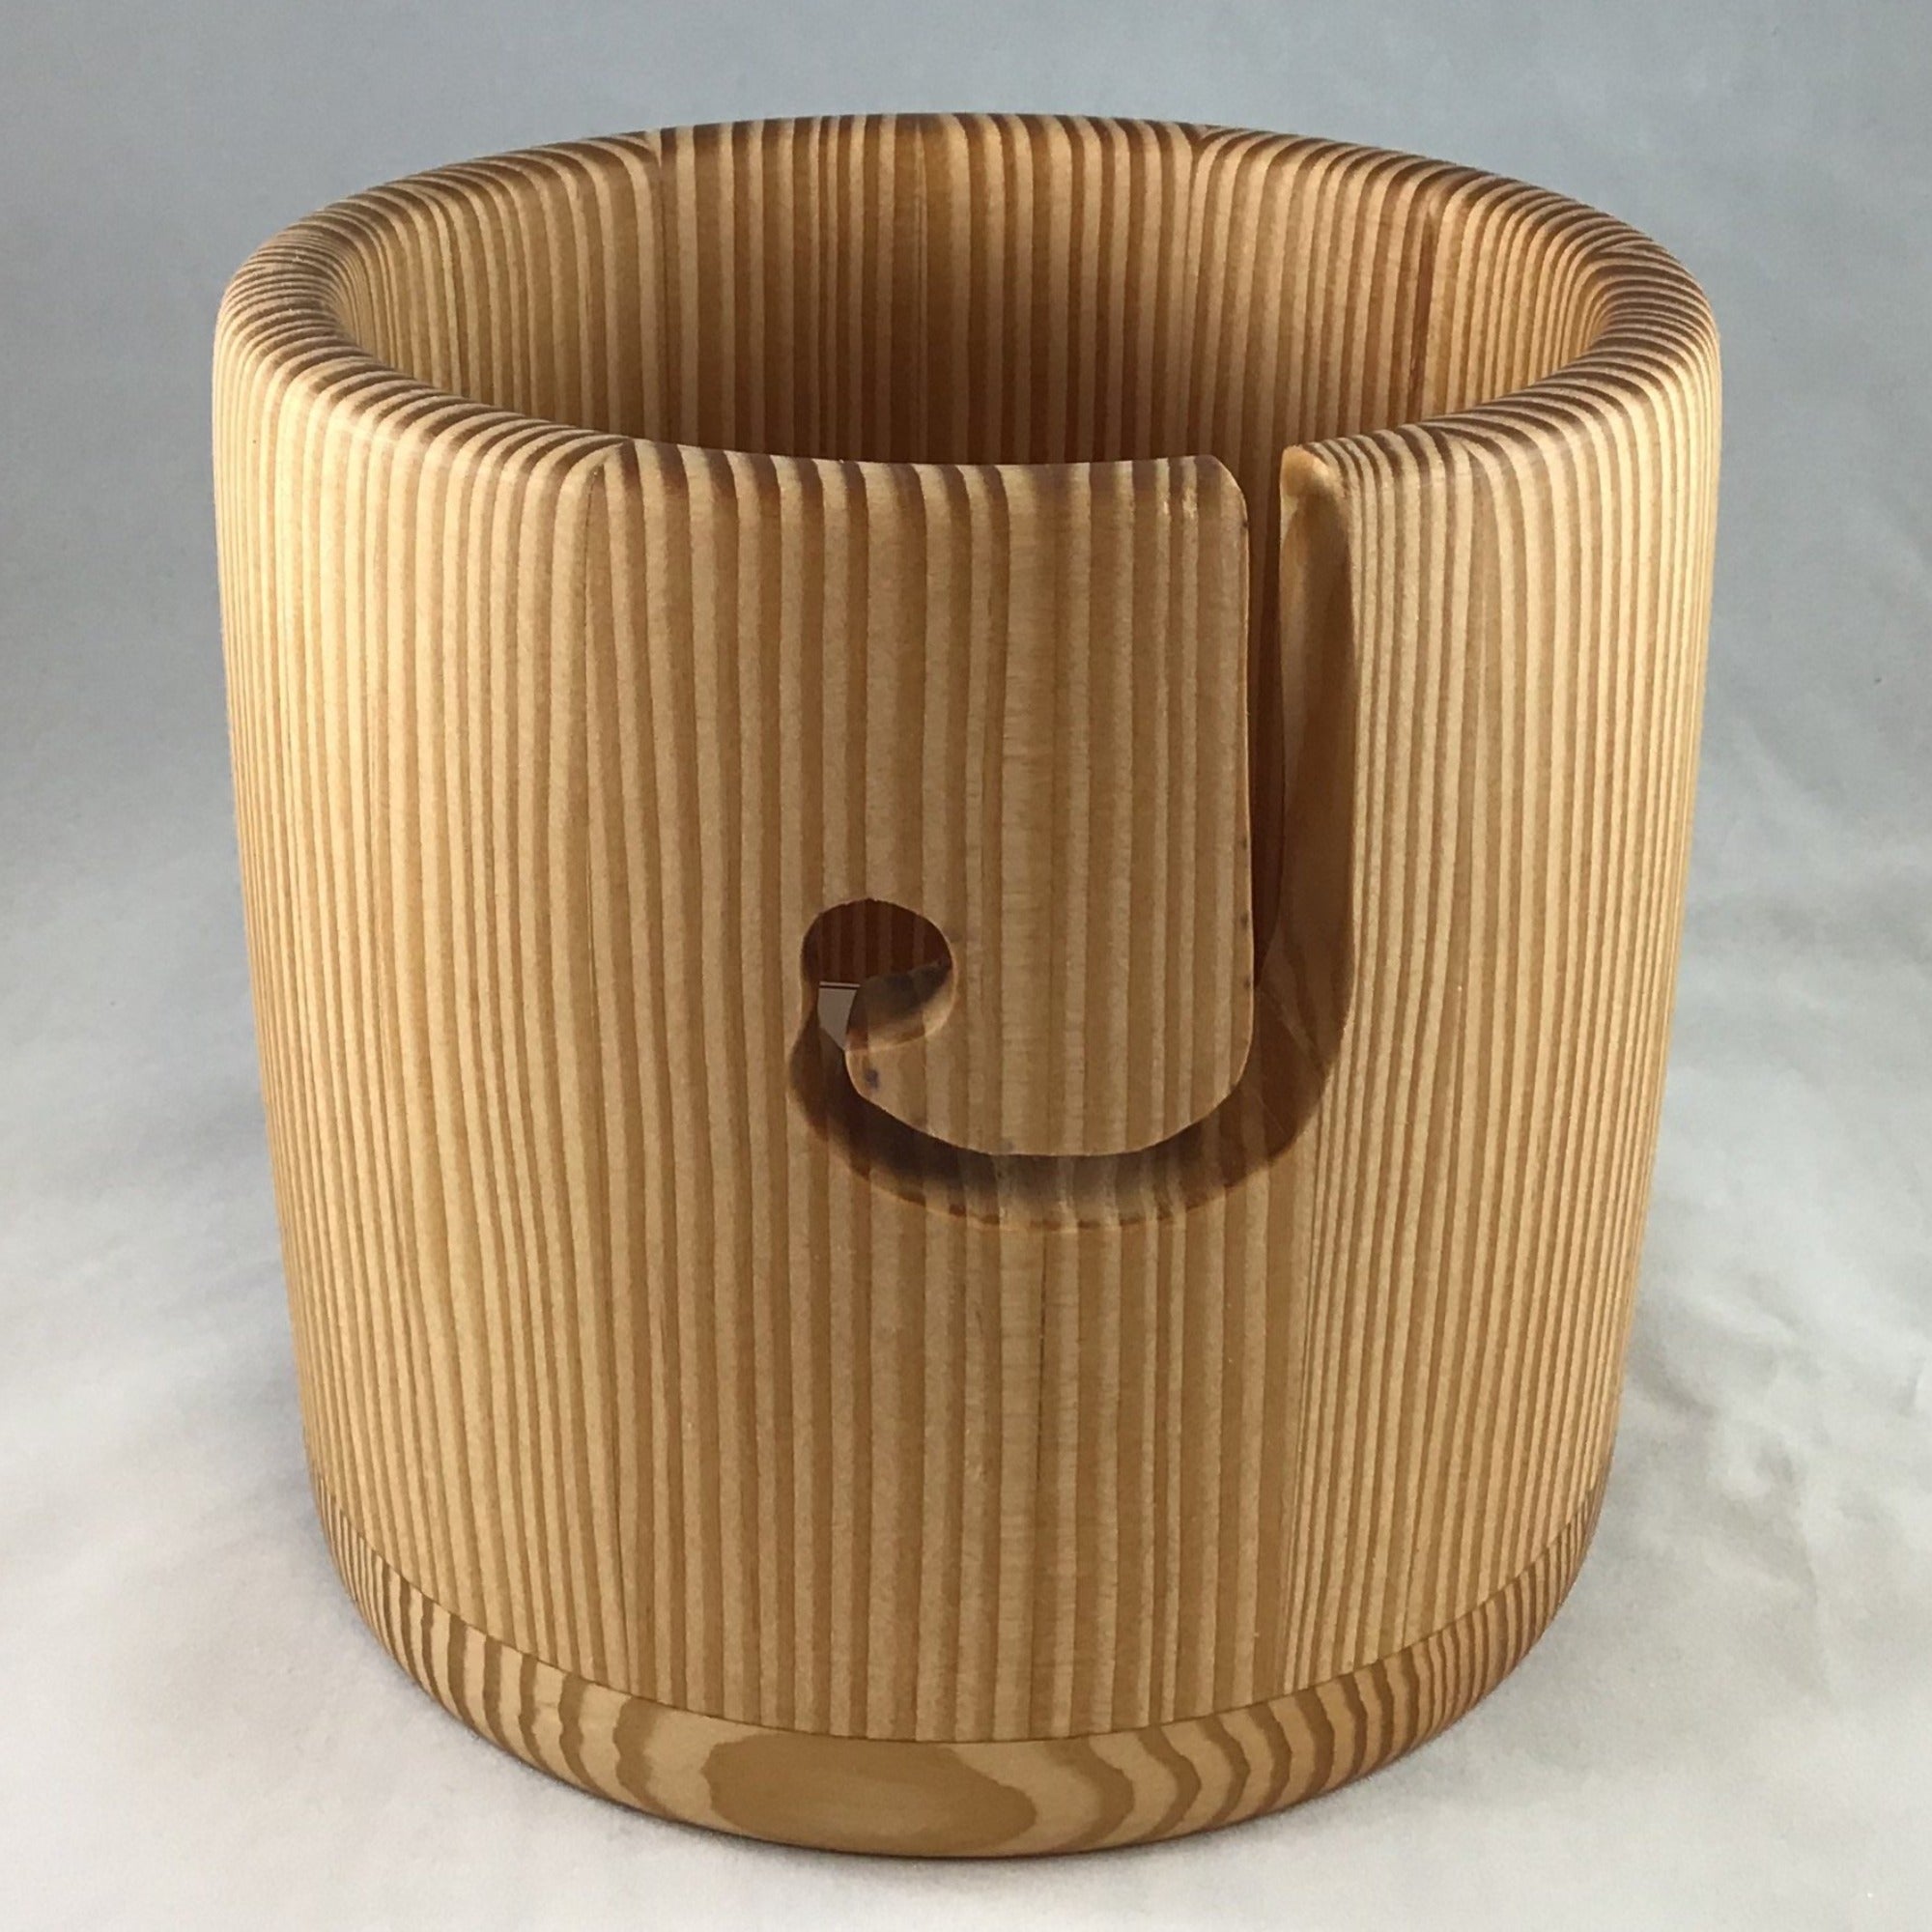 One-of-a-Kind Yarn Bowl by Jerry Ertle – Elm #107